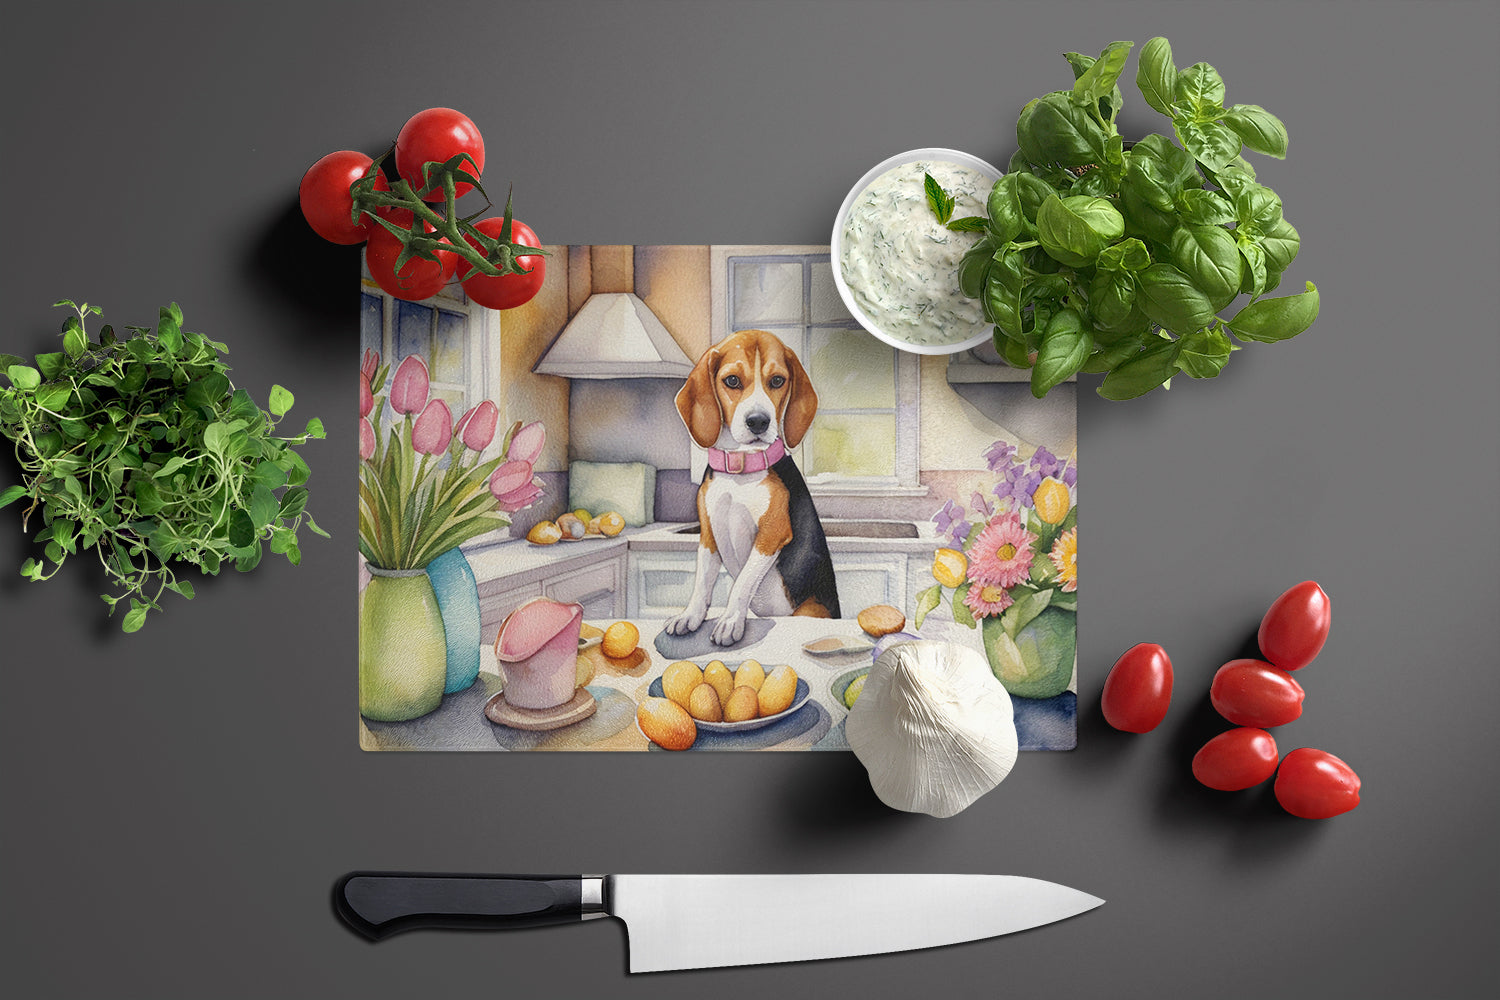 Decorating Easter Beagle Glass Cutting Board